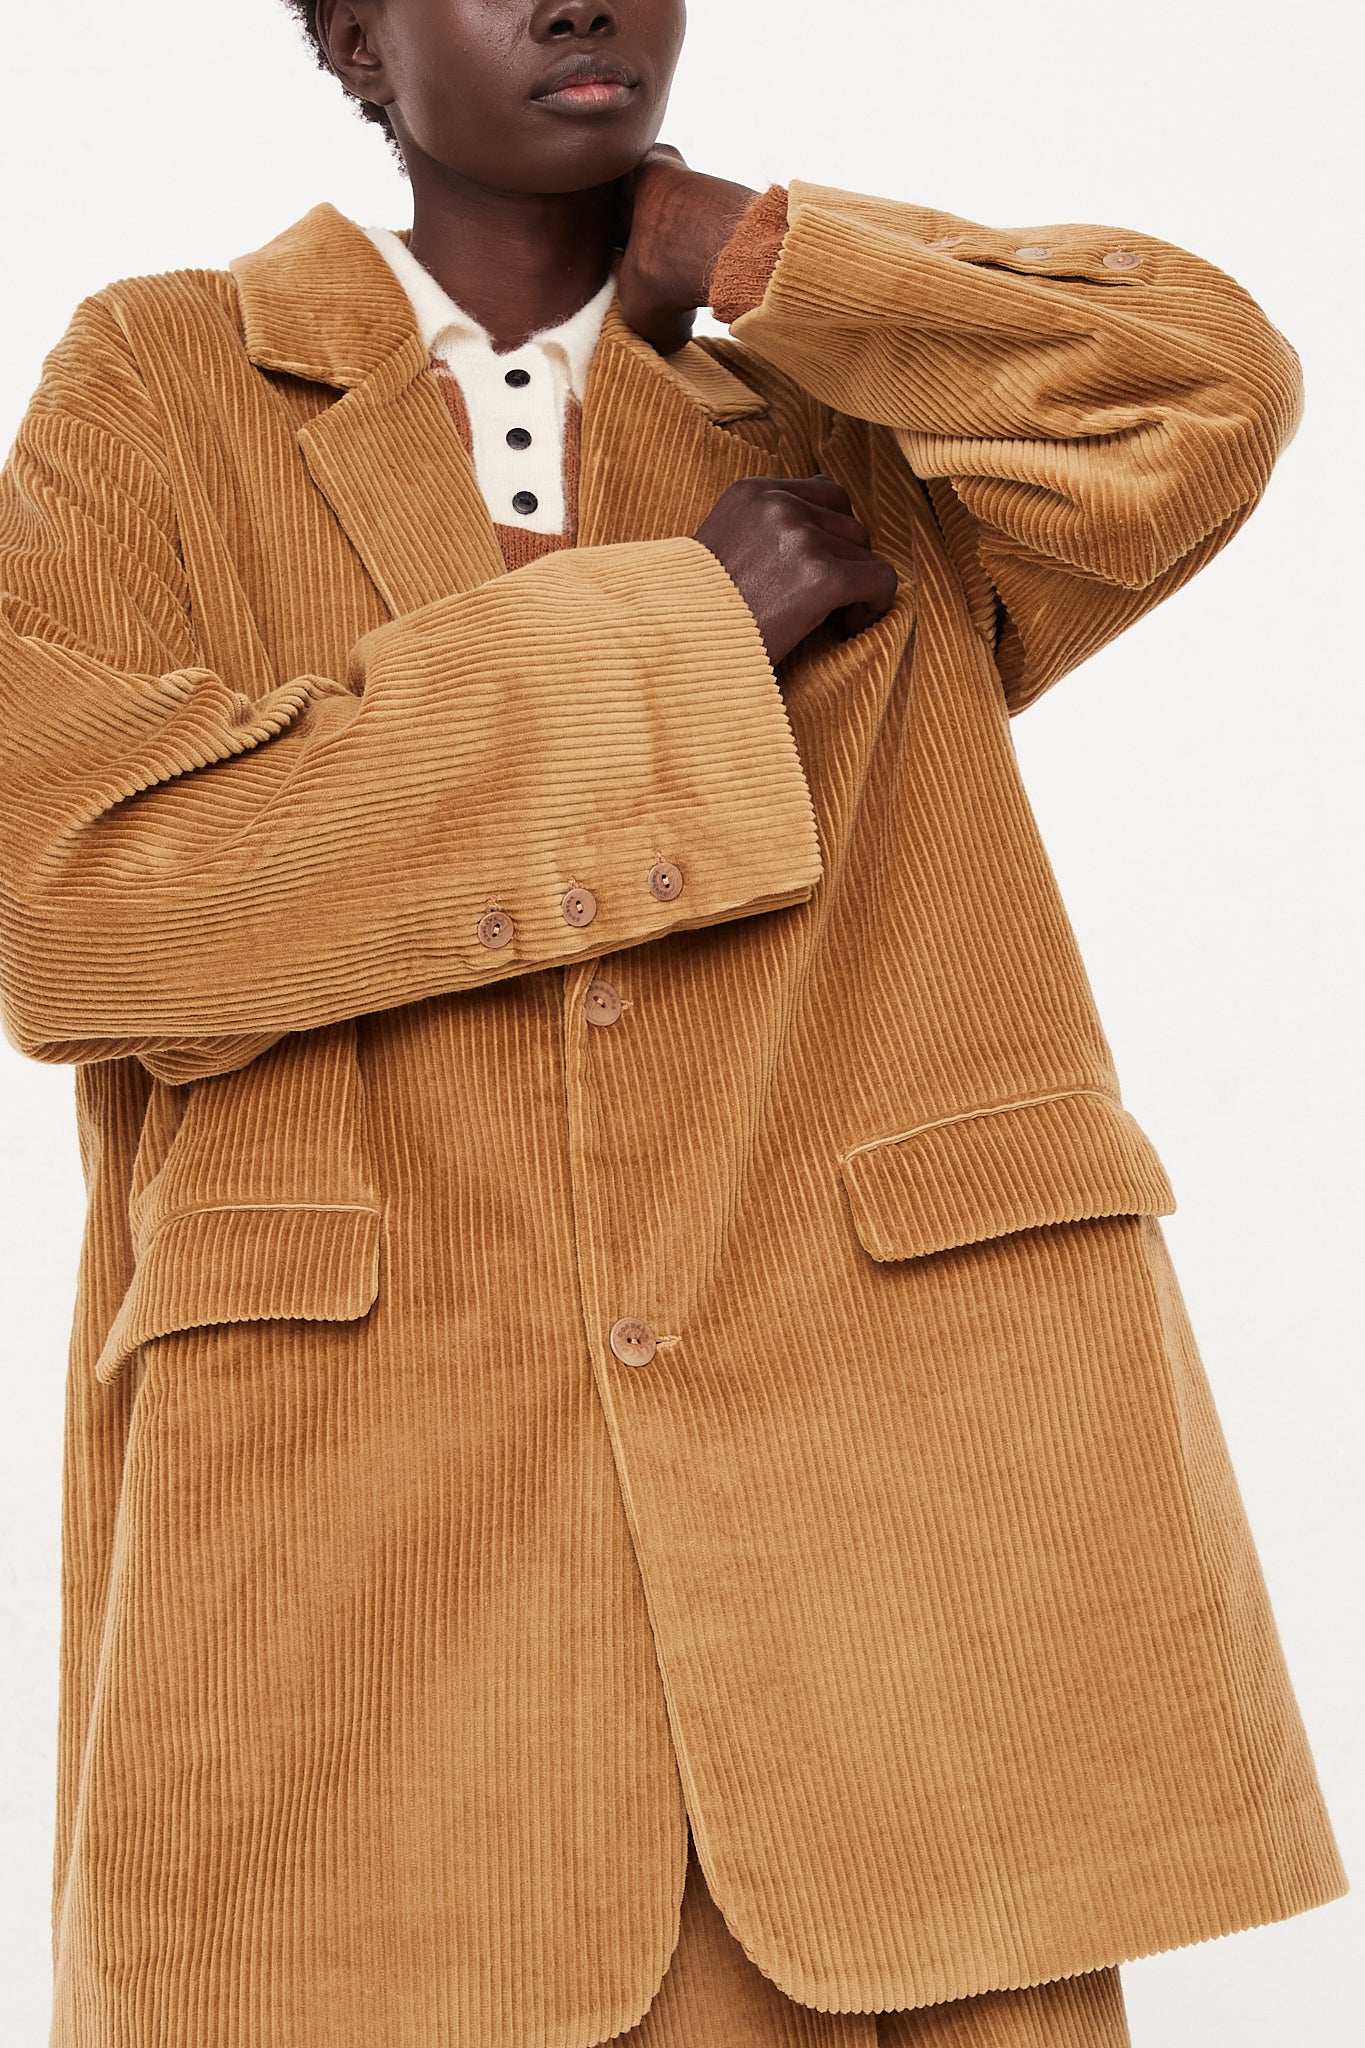 A model wearing a button blazer in a cotton corduroy featuring a notched collar, two flap pockets in front, and back vent. Blazer closed. Up close view of corduroy details. Oversized fit. Designed by Cordera - Oroboro Store